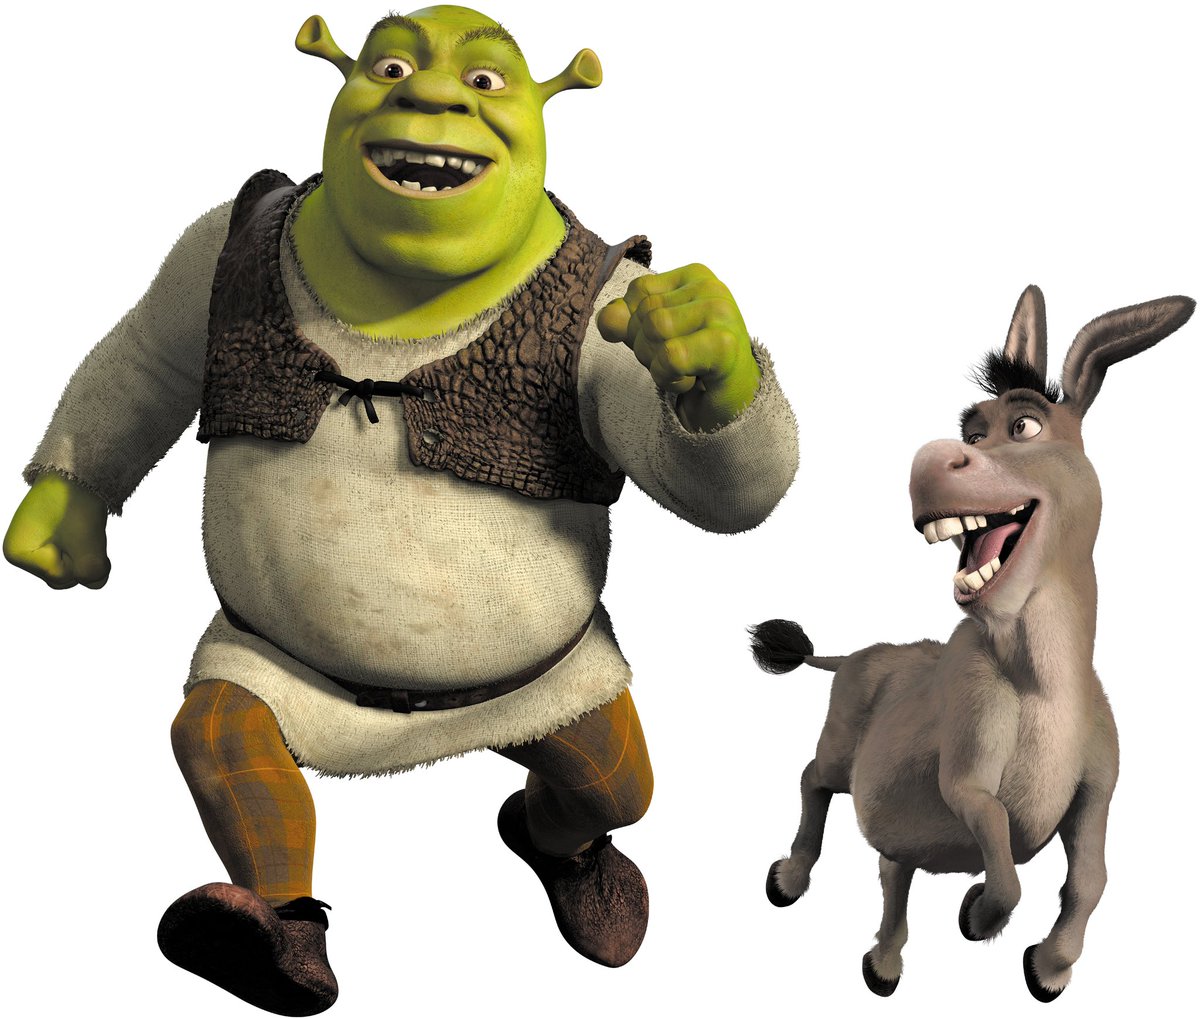 Another great one, Shrek and Donkey running.